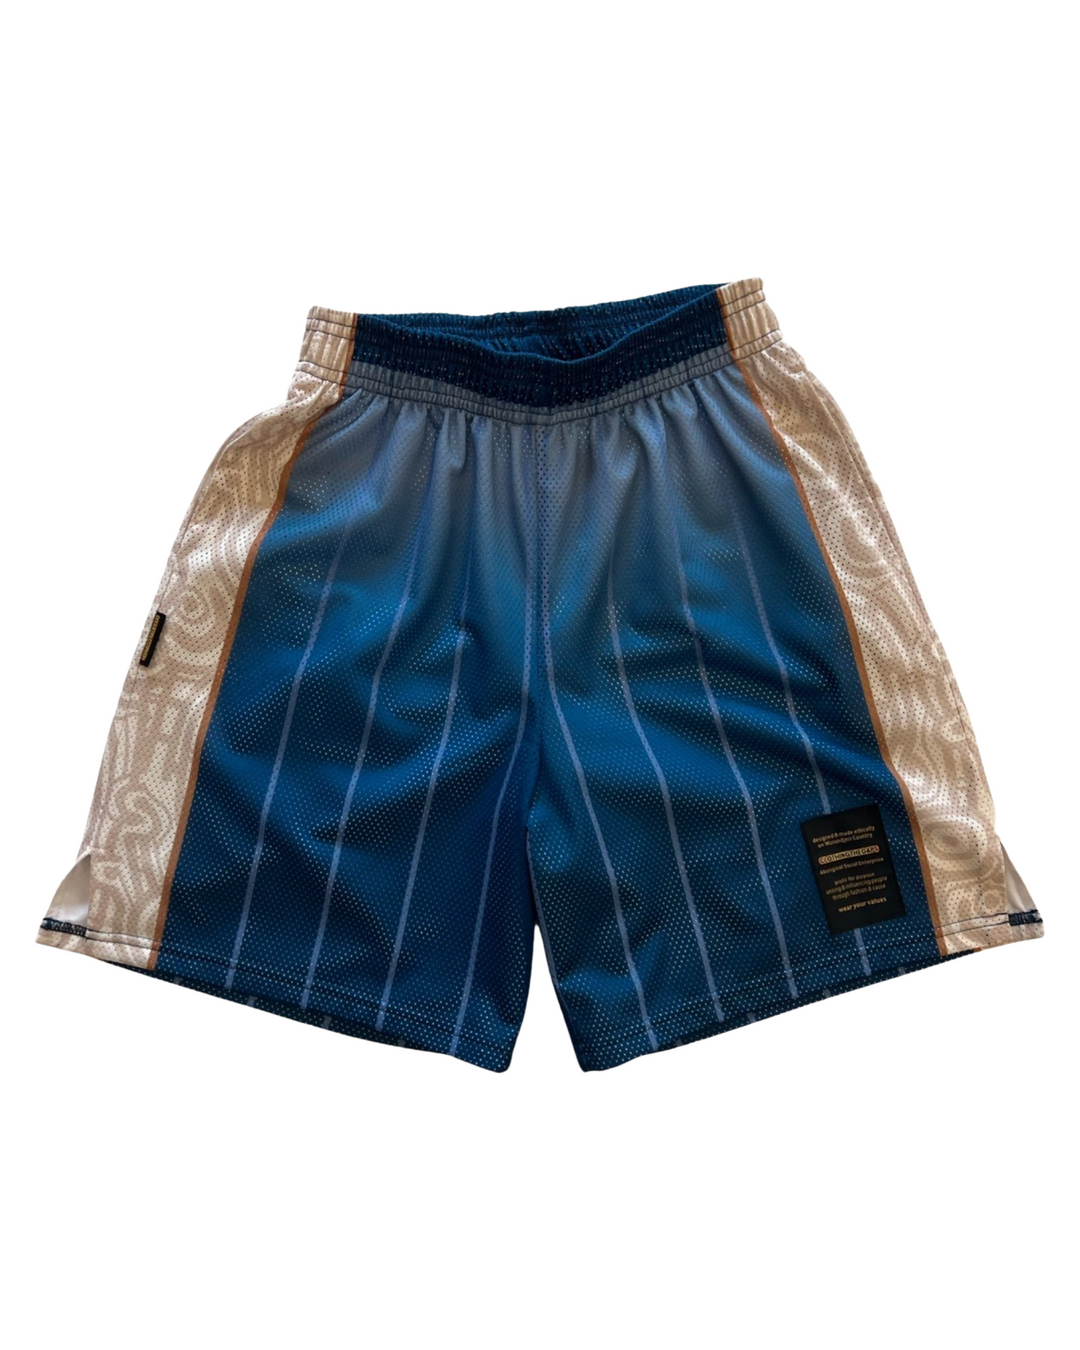 Clothing The Gaps. Naarm Basketball Shorts. Retro look with Mesh retro look crafted with a sublimated blue gradient finish light blue vertical lines going down leg. Cream/tan aboriginal  artwork strip going down side of both legs. Has a elastic waist, deep pockets and clothing the gaps patch on corner of left leg. 